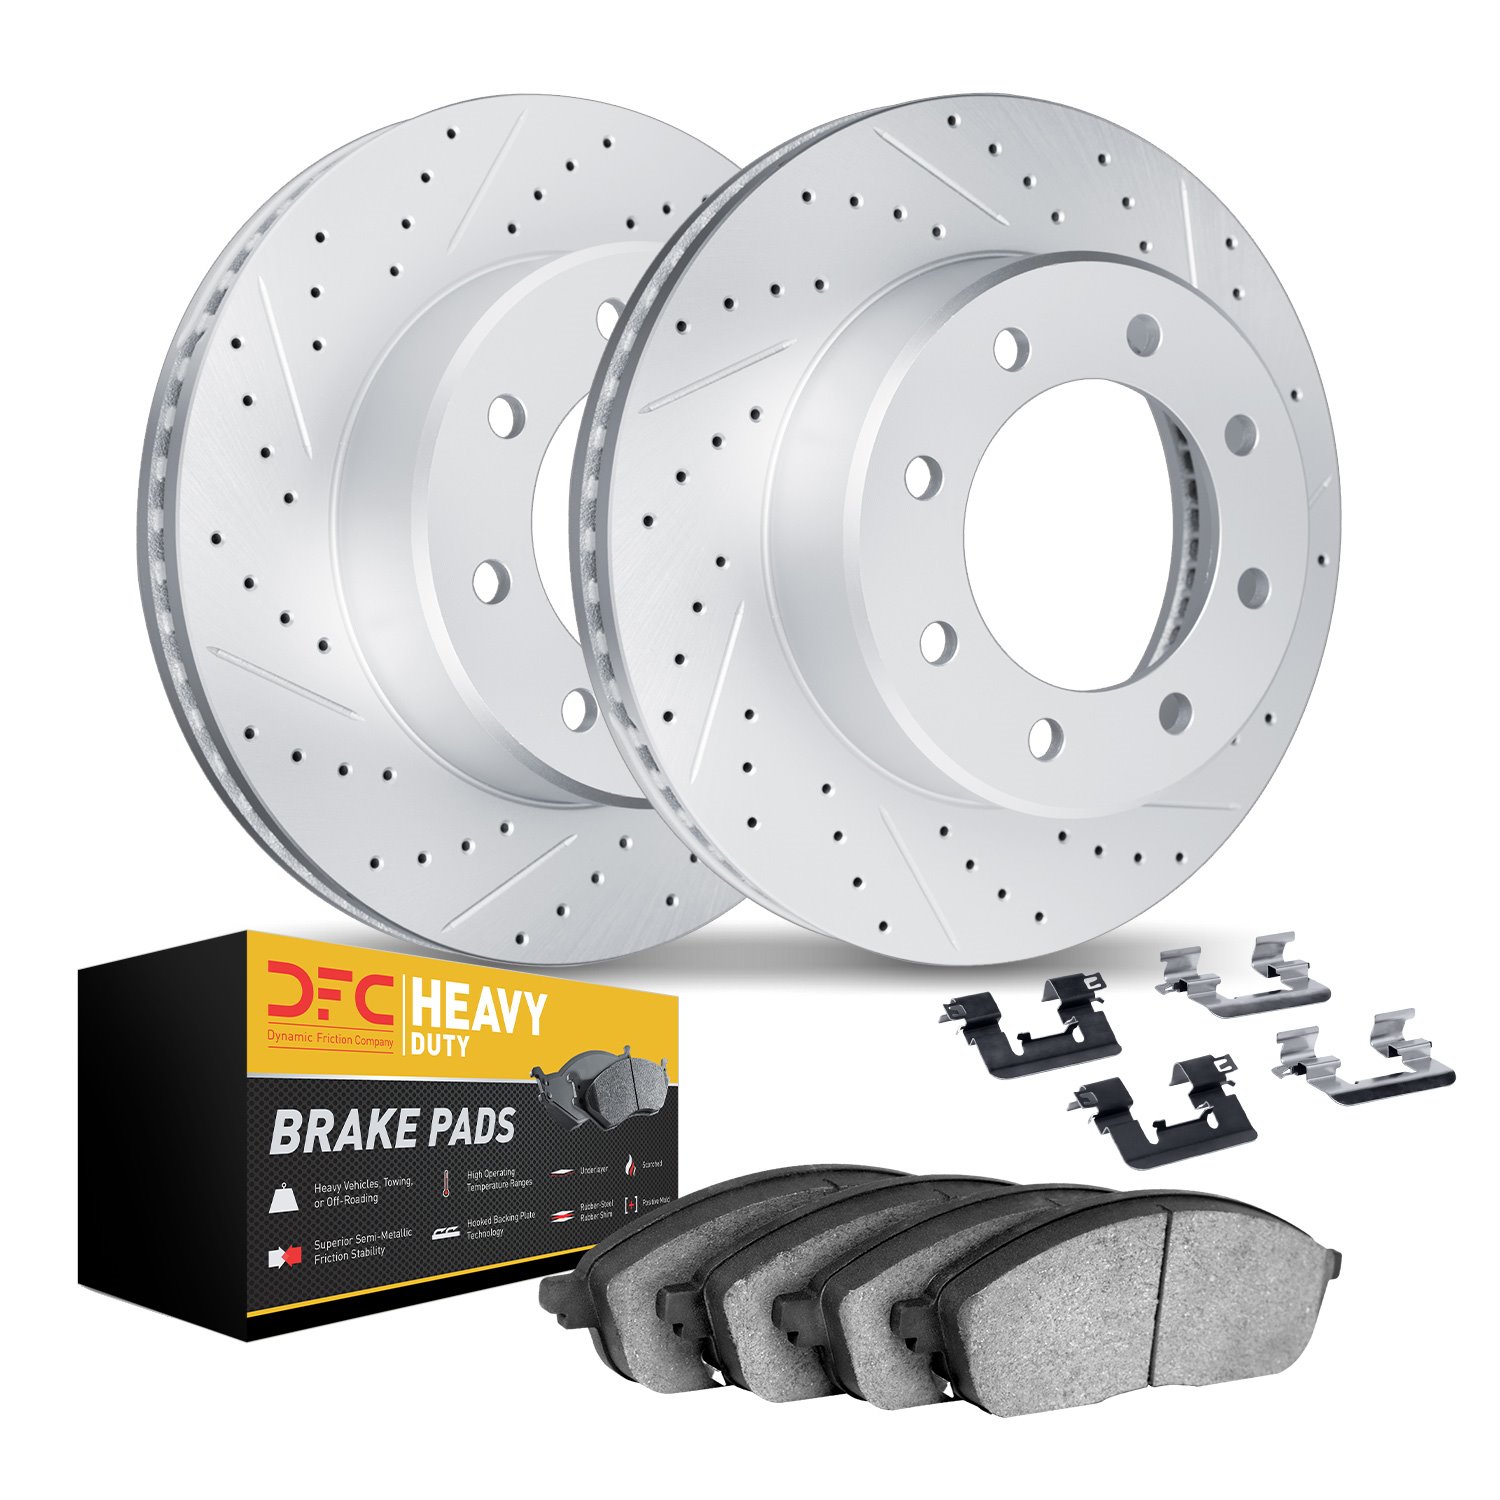 2212-99170 Geoperformance Drilled/Slotted Rotors w/Heavy-Duty Pads Kit & Hardware, 2006-2010 Ford/Lincoln/Mercury/Mazda, Positio